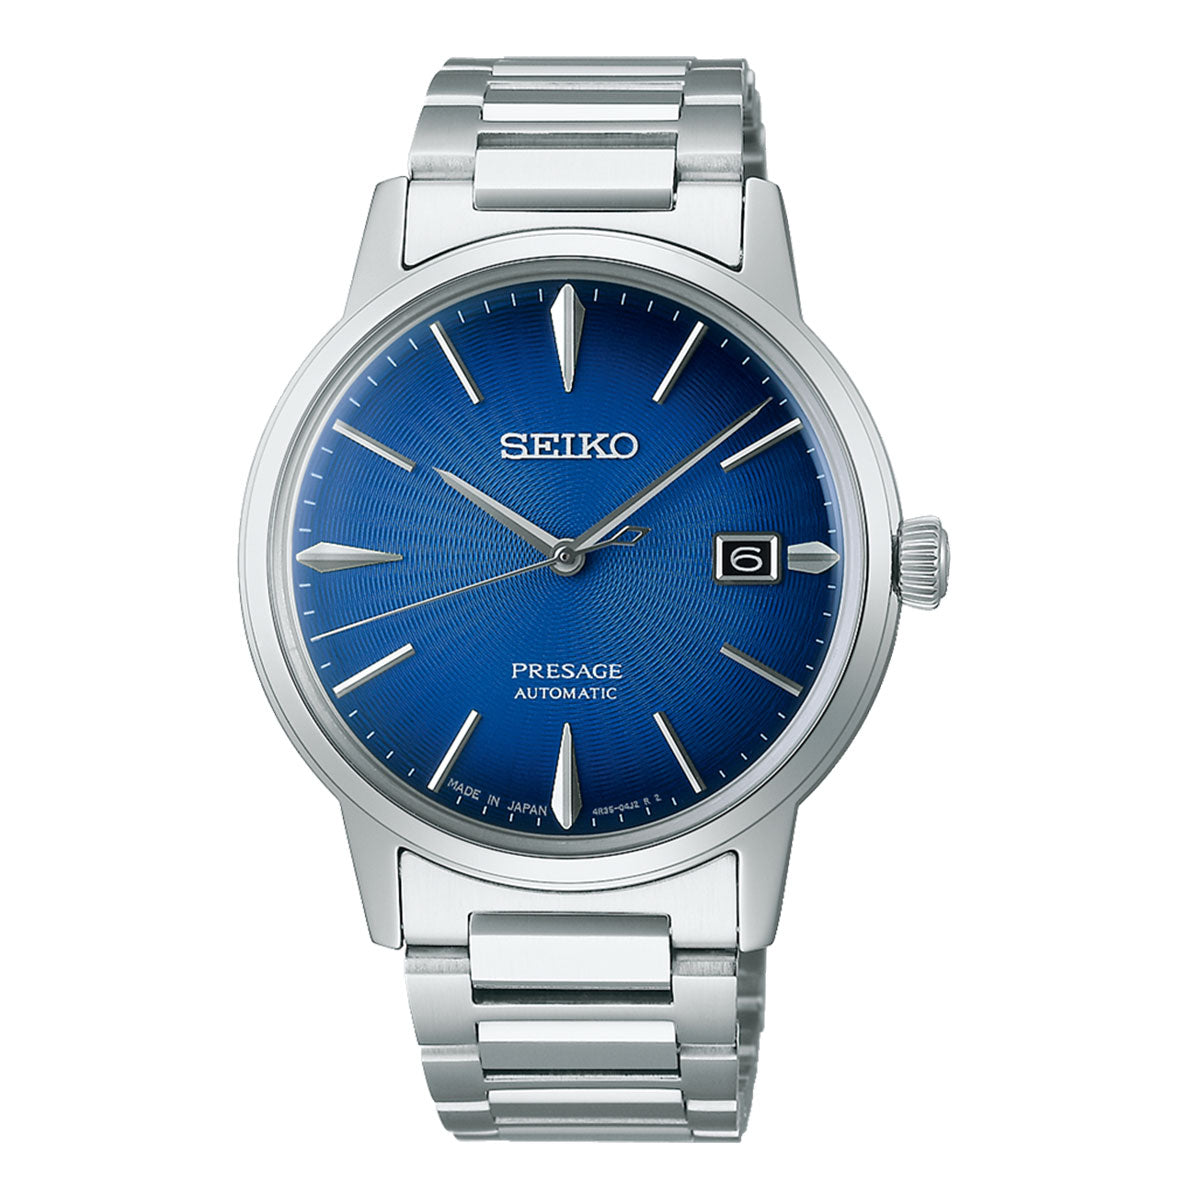 Seiko Presage Automatic With Manual Winding 39.5mm Watch